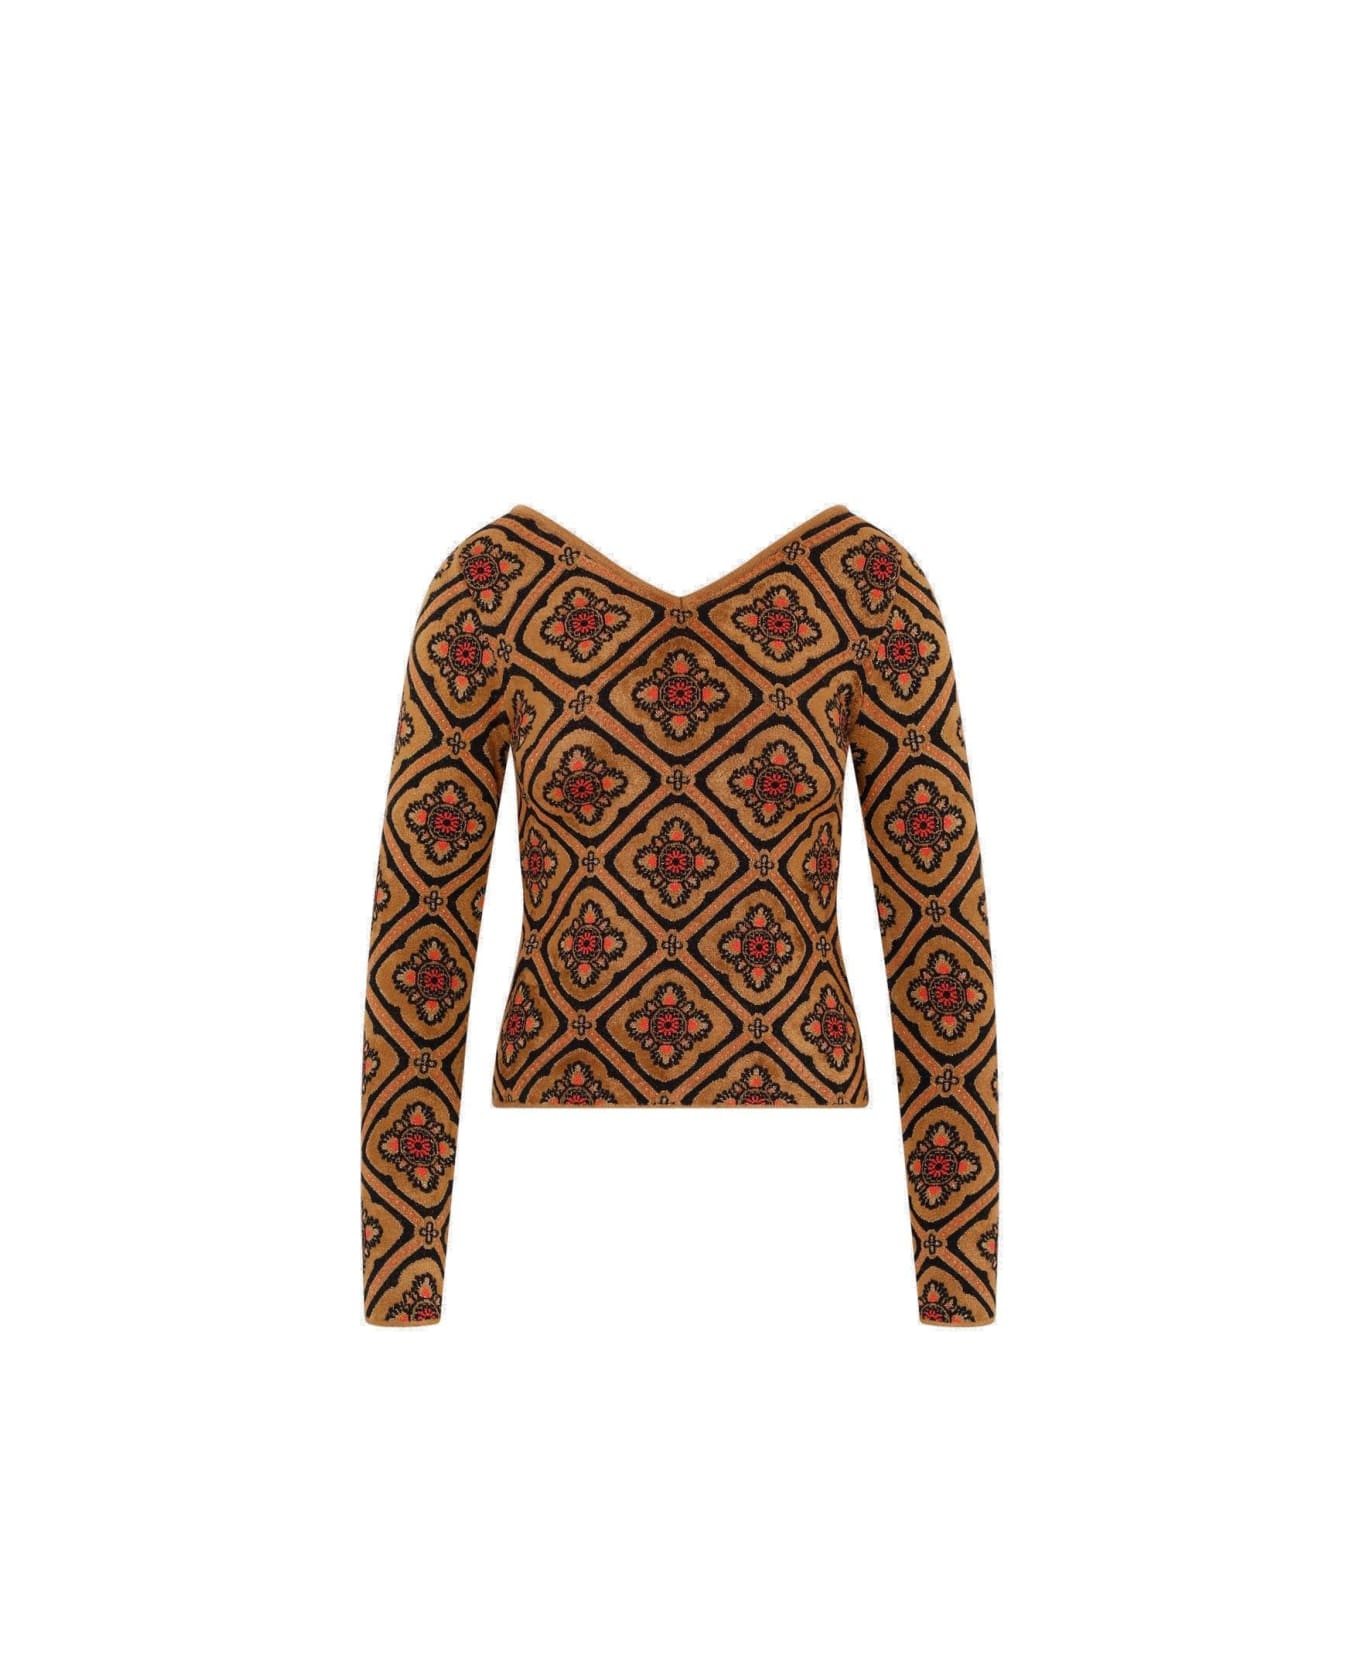 Etro Floral-jacquard Knitted Jumper - Marrone/multicolour